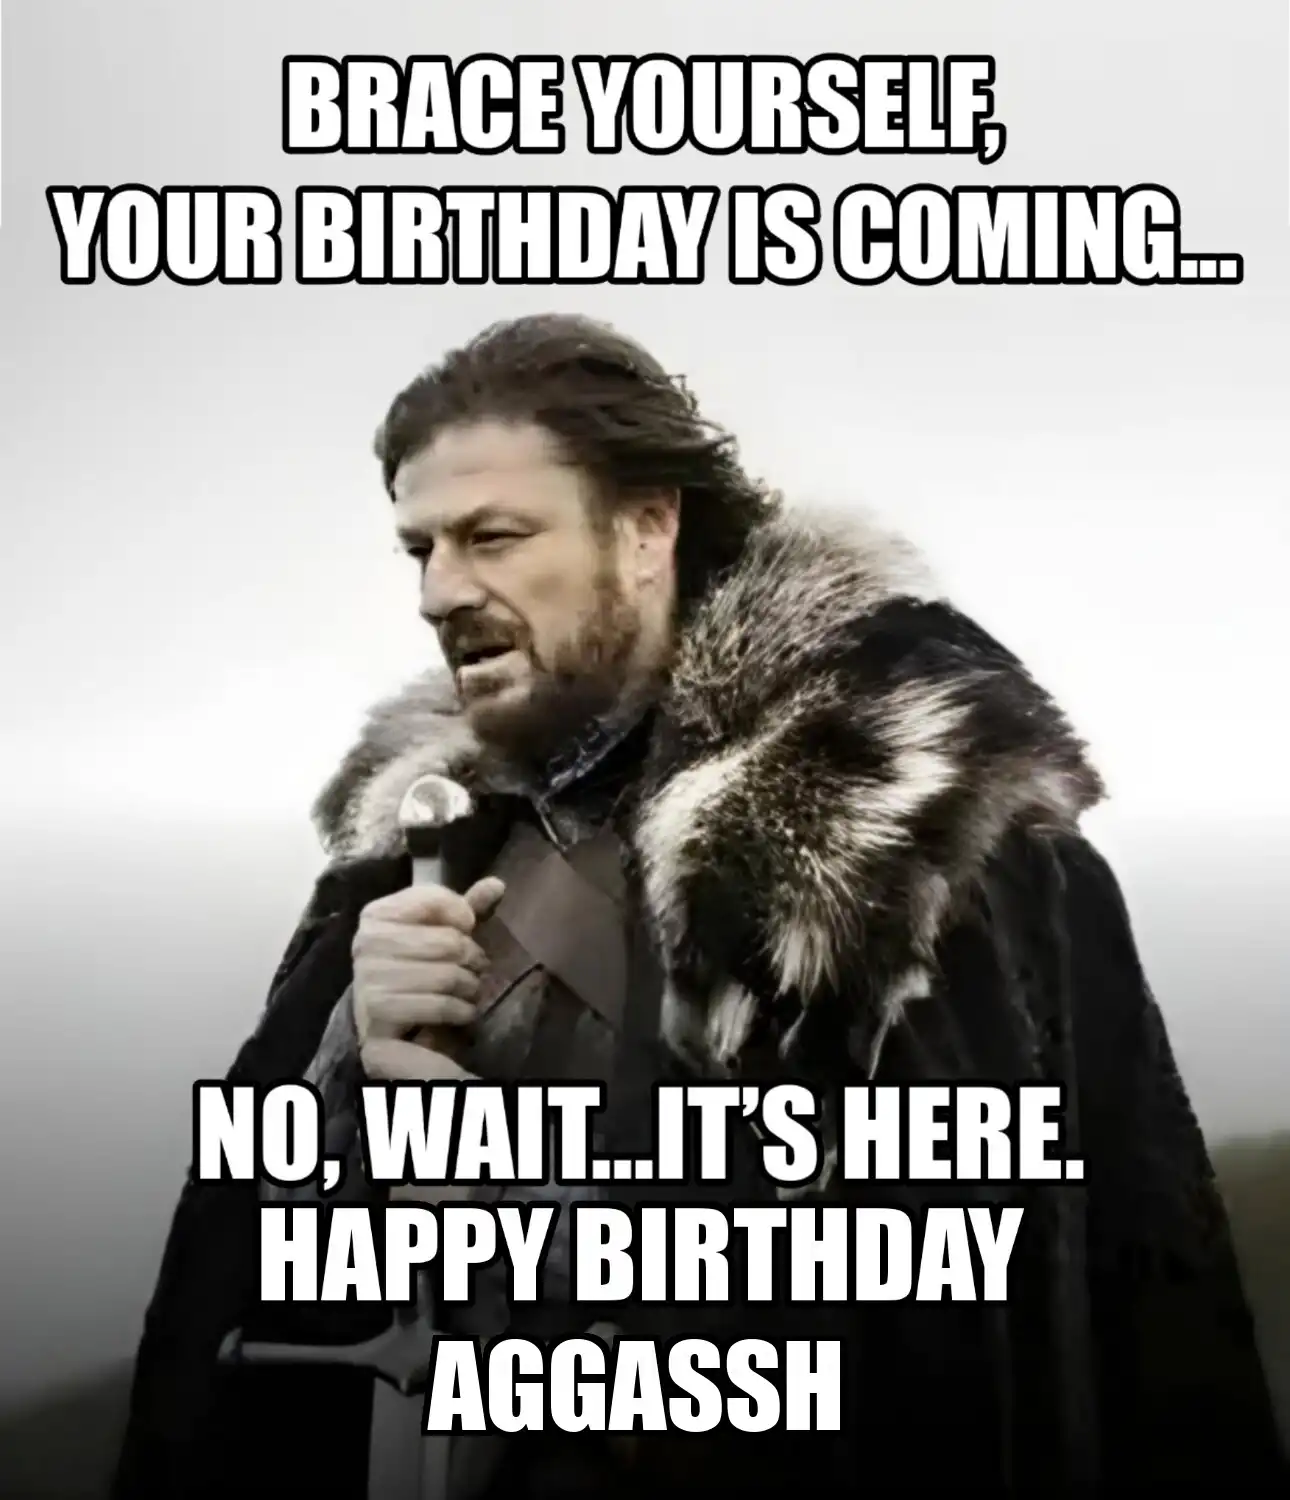 Happy Birthday Aggassh Brace Yourself Your Birthday Is Coming Meme